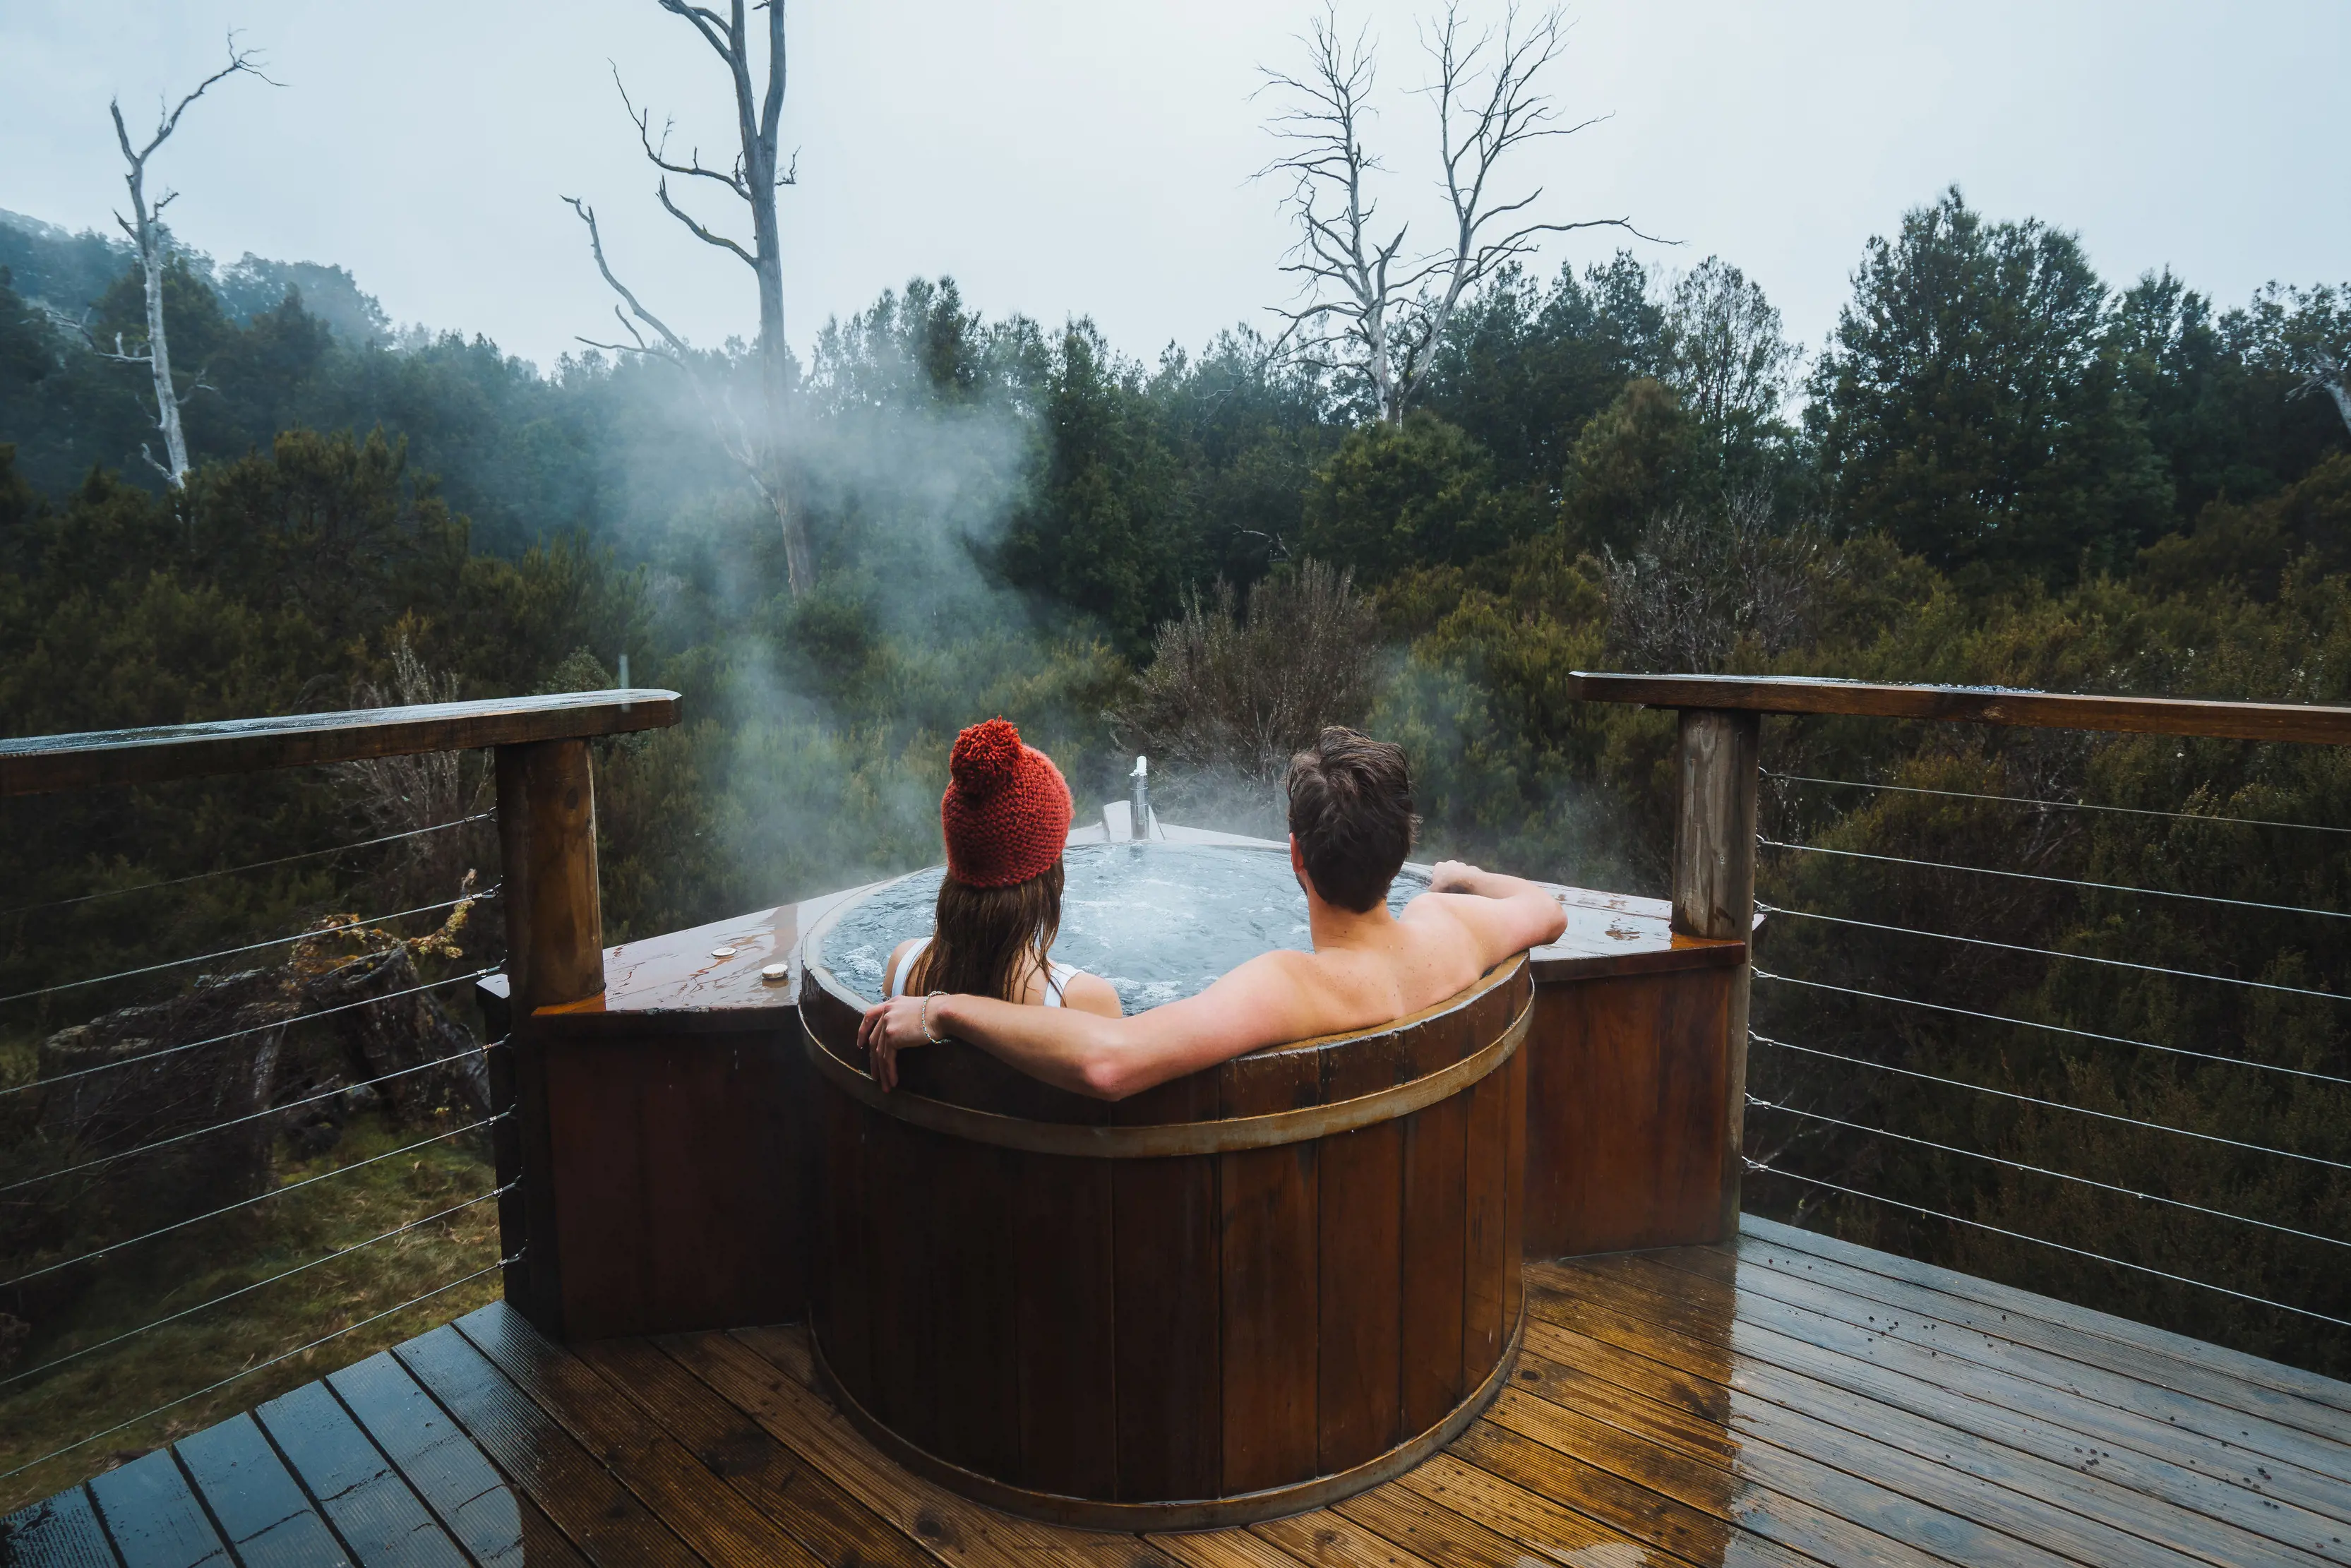 Couple relax in the steaming outdoor bath tub during winter at King Billy Suite, Peppers Cradle Mountain Lodge. The woman wears a read beanie.